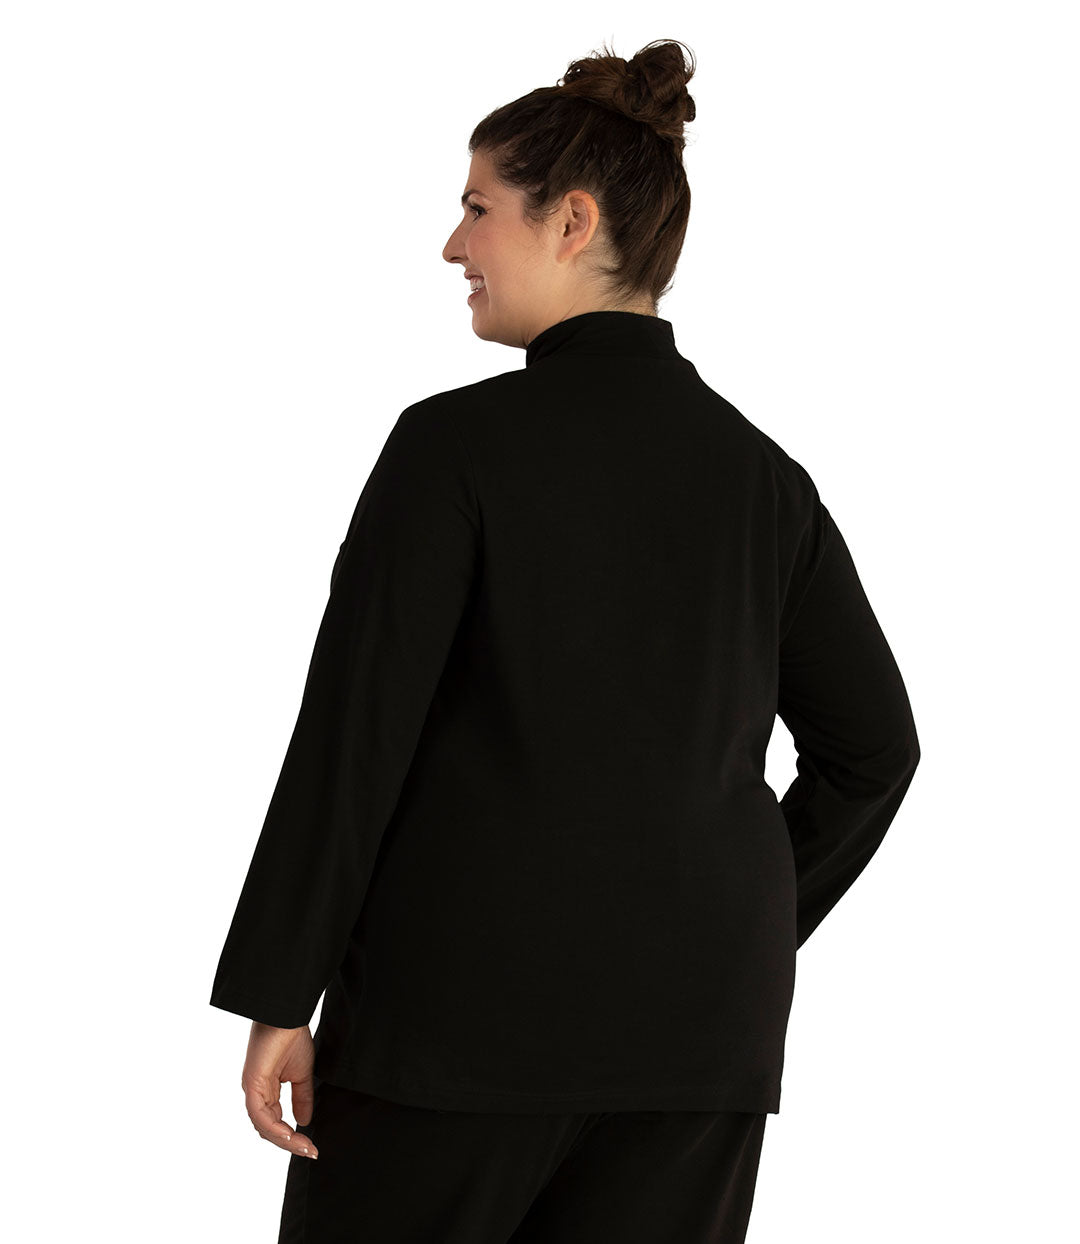 Plus size woman, facing back looking left, wearing JunoActive plus size Stretch Naturals Lite Mock Neck Top in the color Black. She is wearing JunoActive Plus Size Leggings in the color Black.